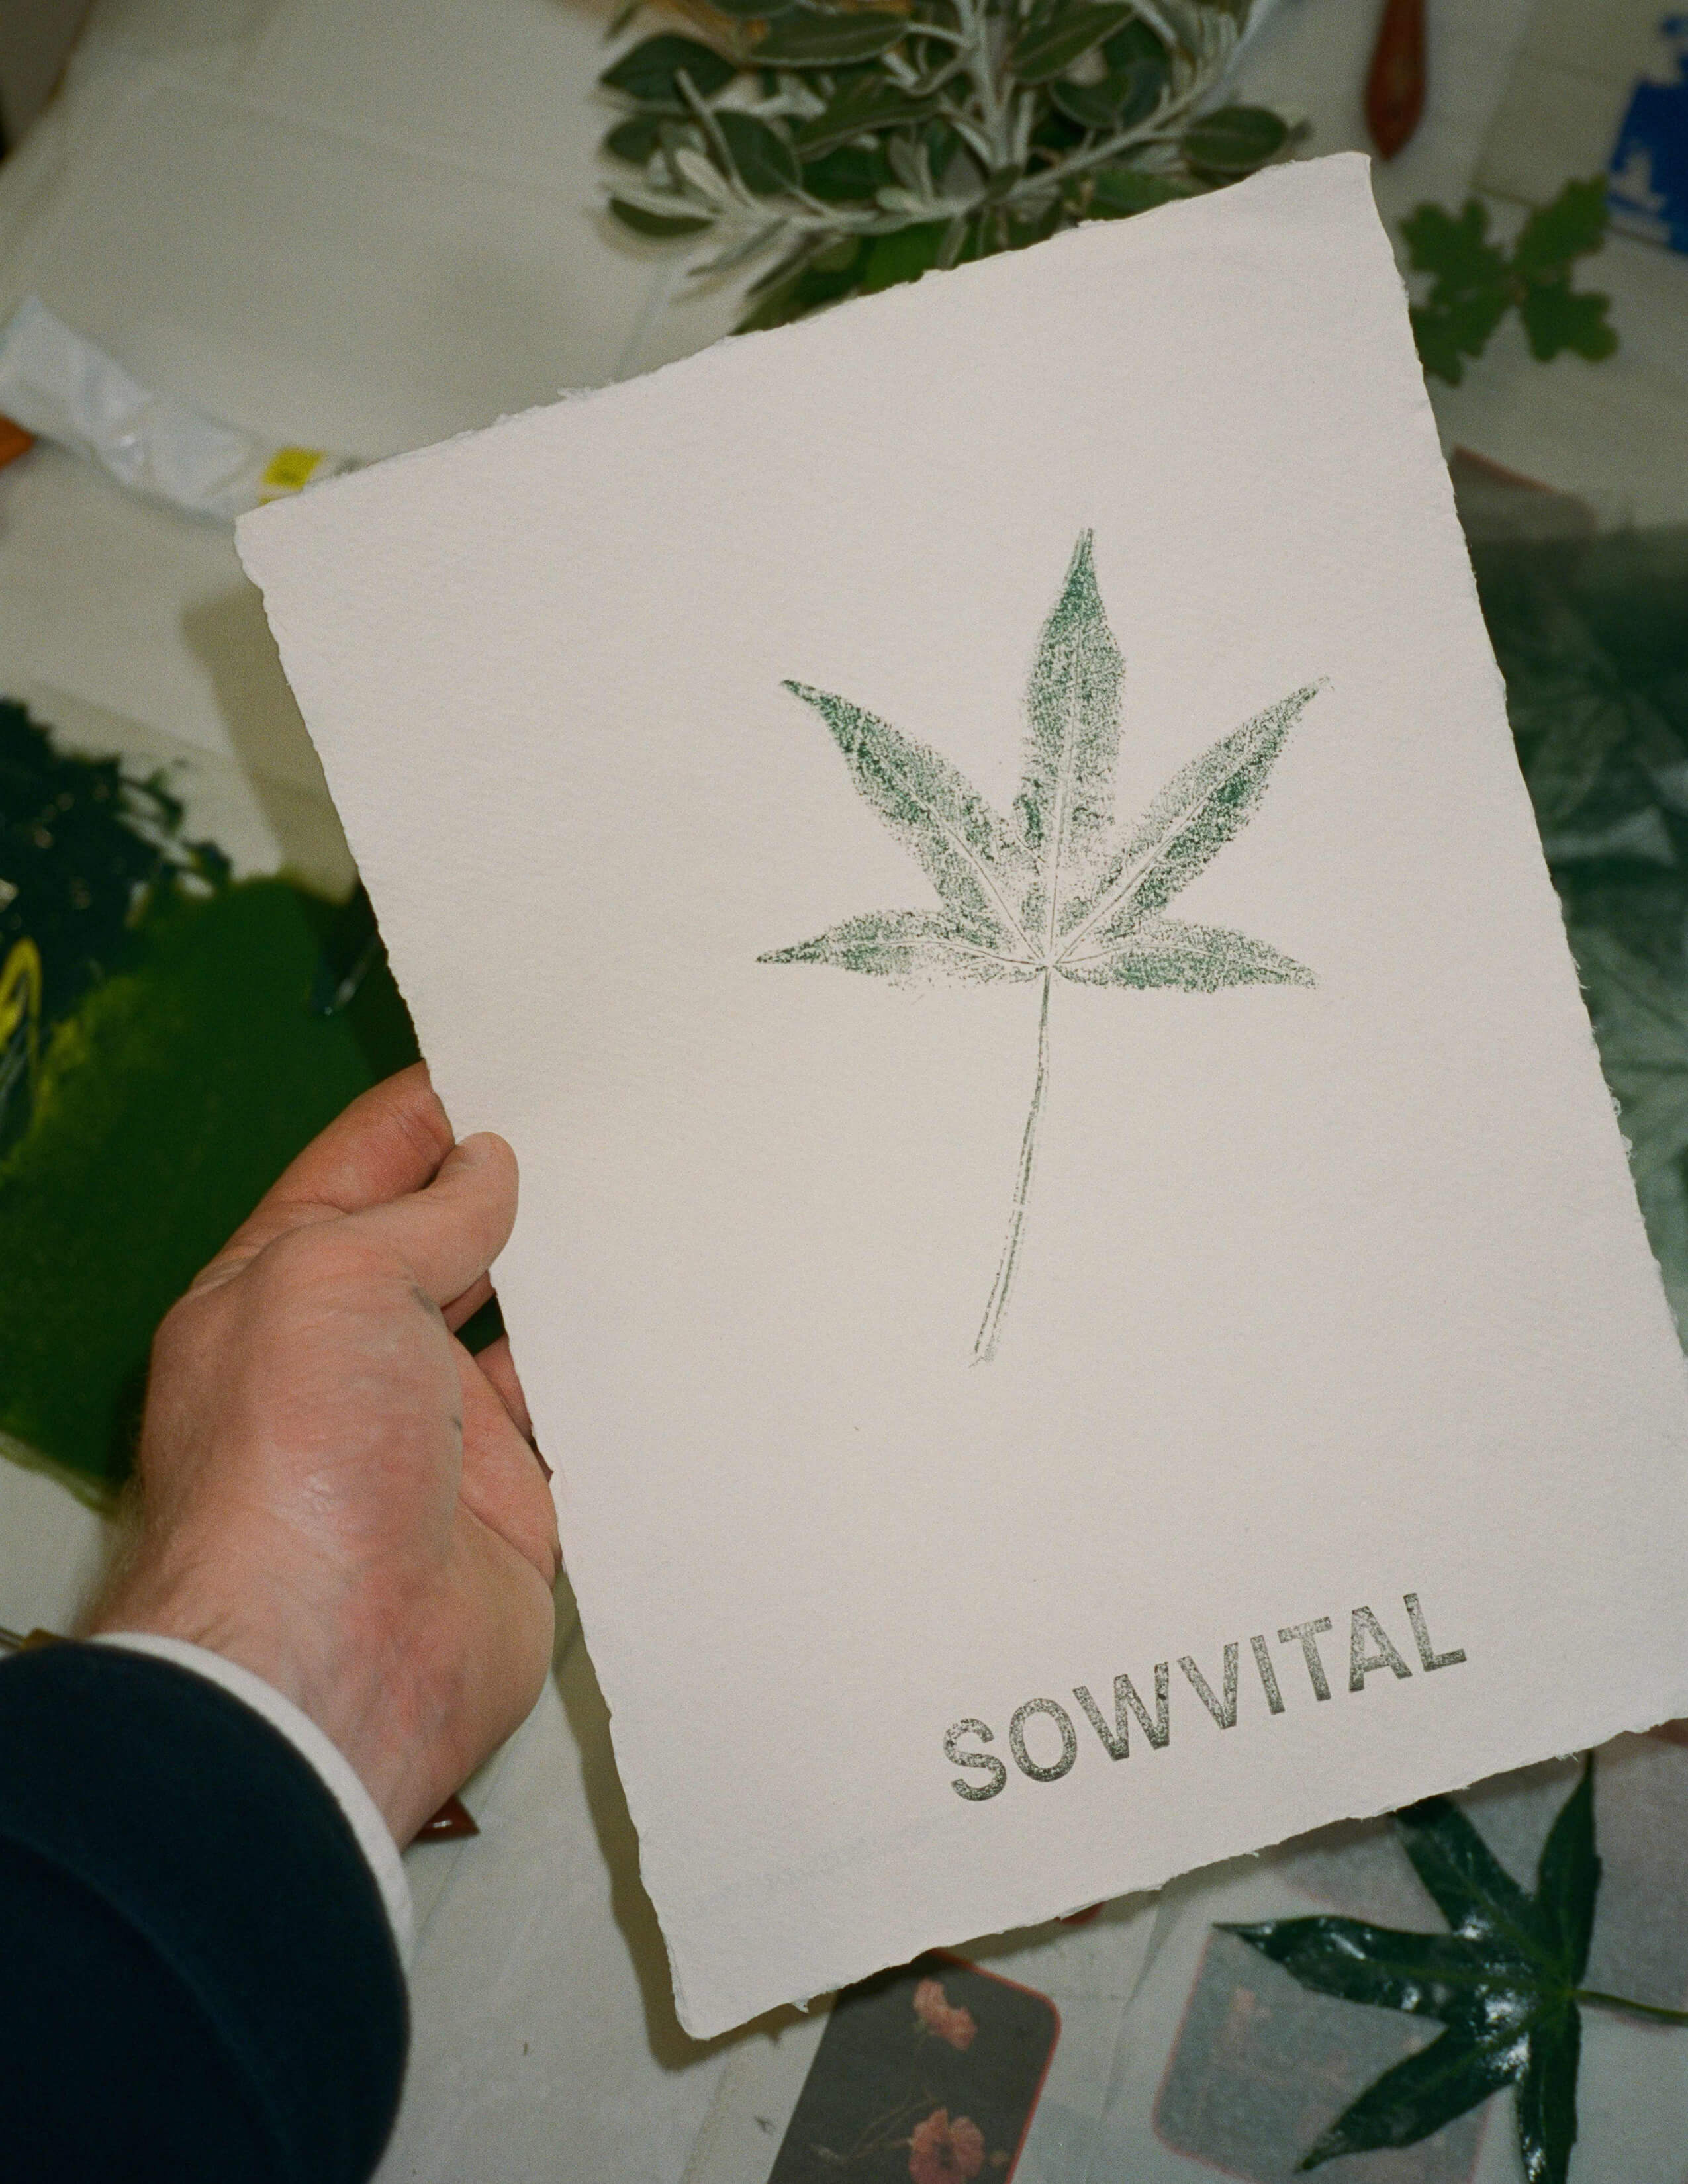 A hand holding a piece of paper with nature plant printing and Sowvital’s brand at the bottom of the paper.